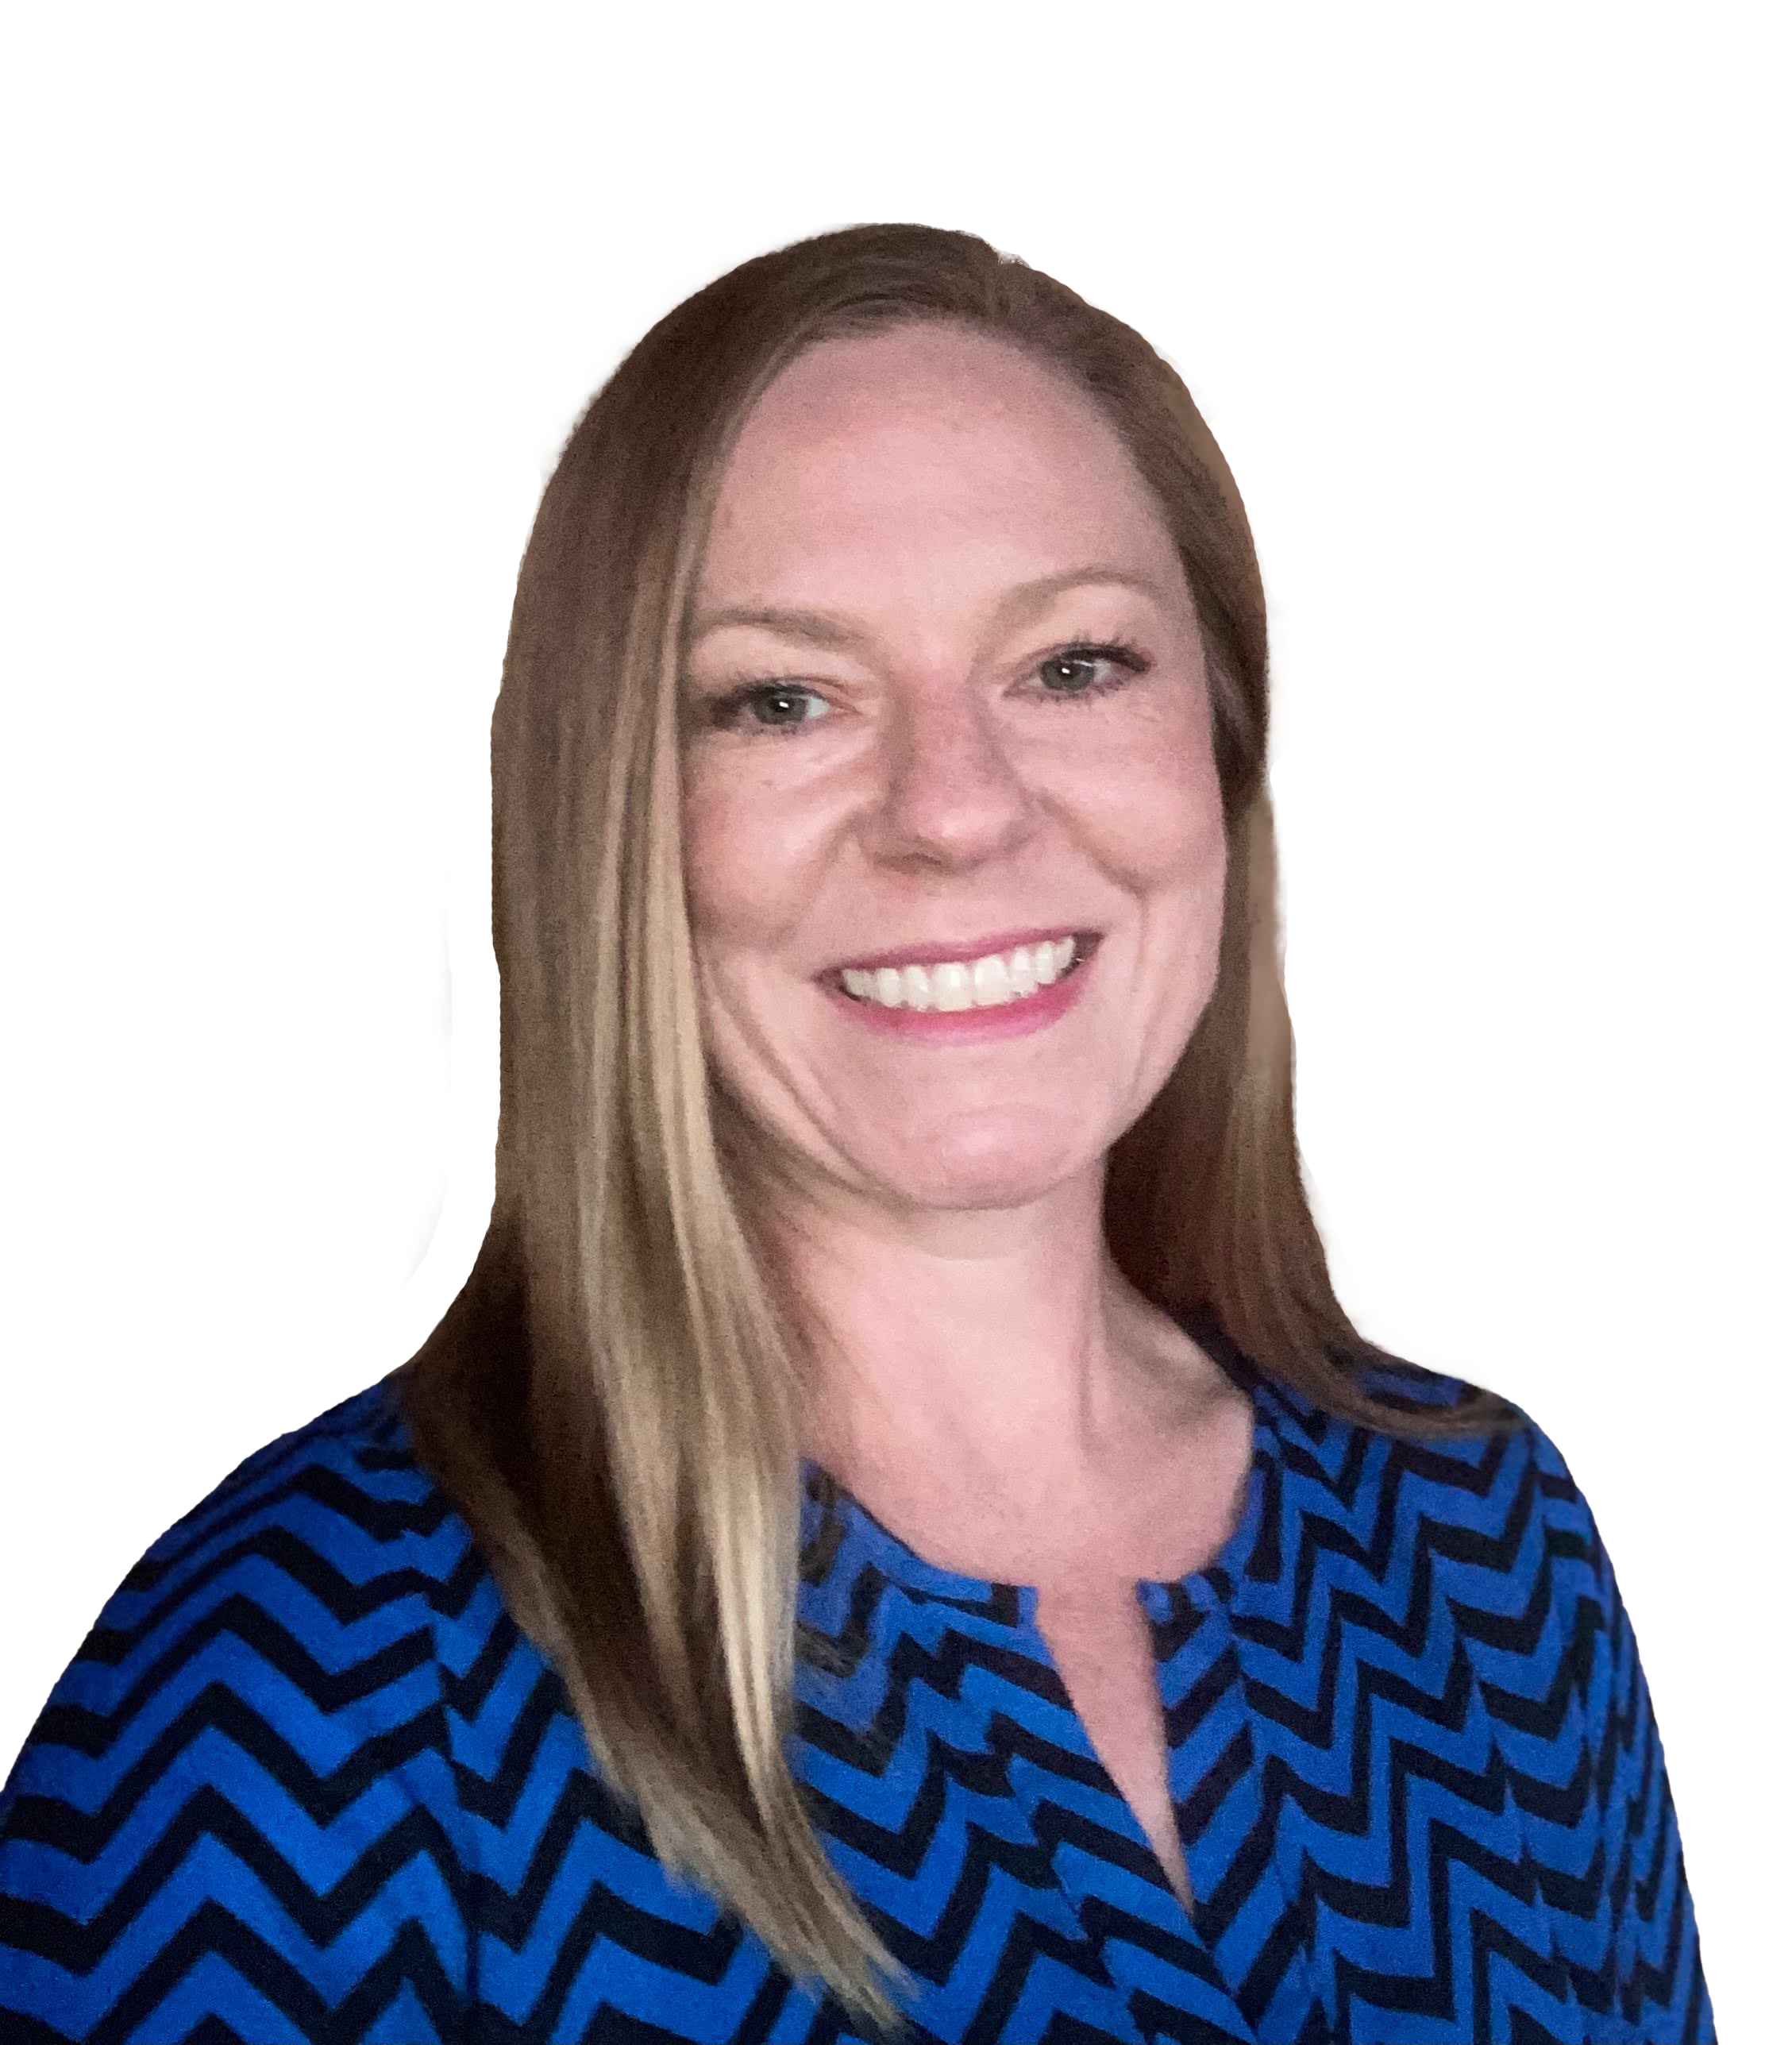 Meredith McCurdy leads APTIM’s Sustainable Sport Index, bringing expertise in sports marketing, sponsorship, and global events with a focus on developing the business case for sustainability.